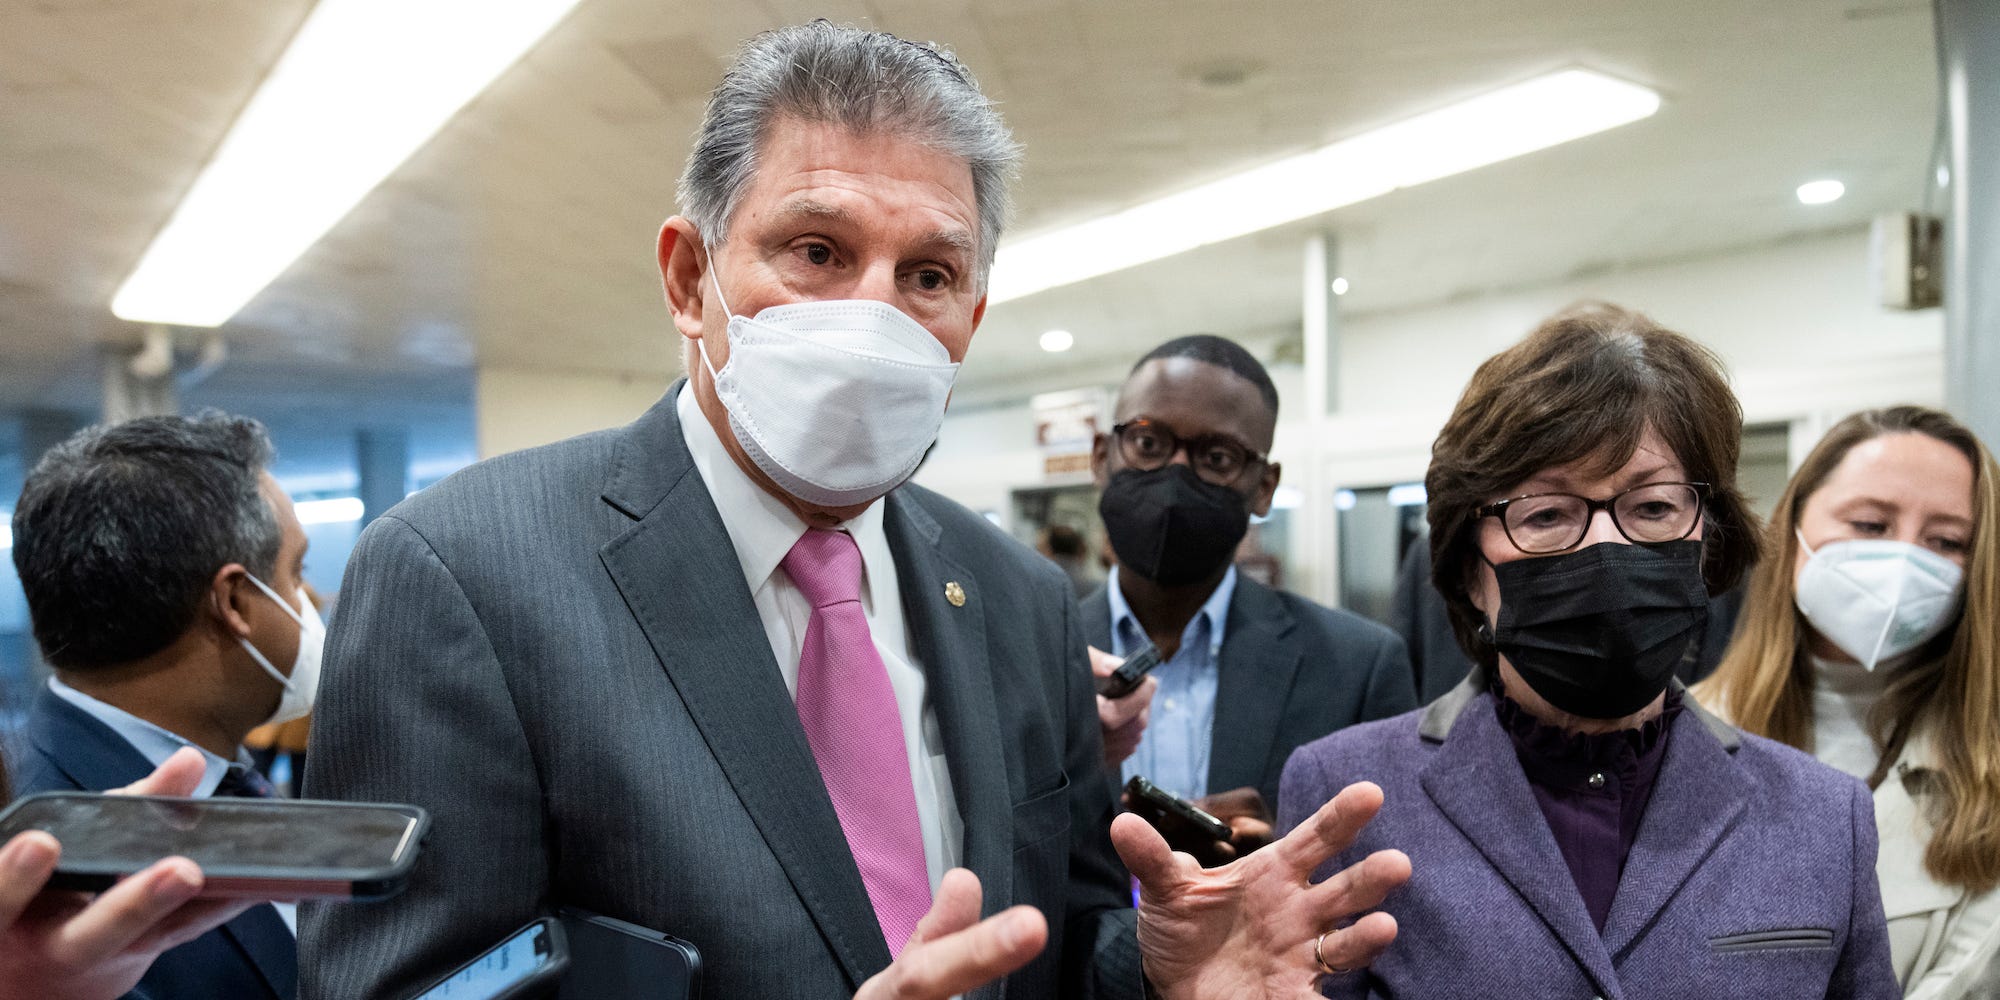 Sens. Joe Manchin, D-W.Va., and Susan Collins, R-Maine, talk with reporters about voting rights in the U.S. Capitol on Thursday, January 20, 2022